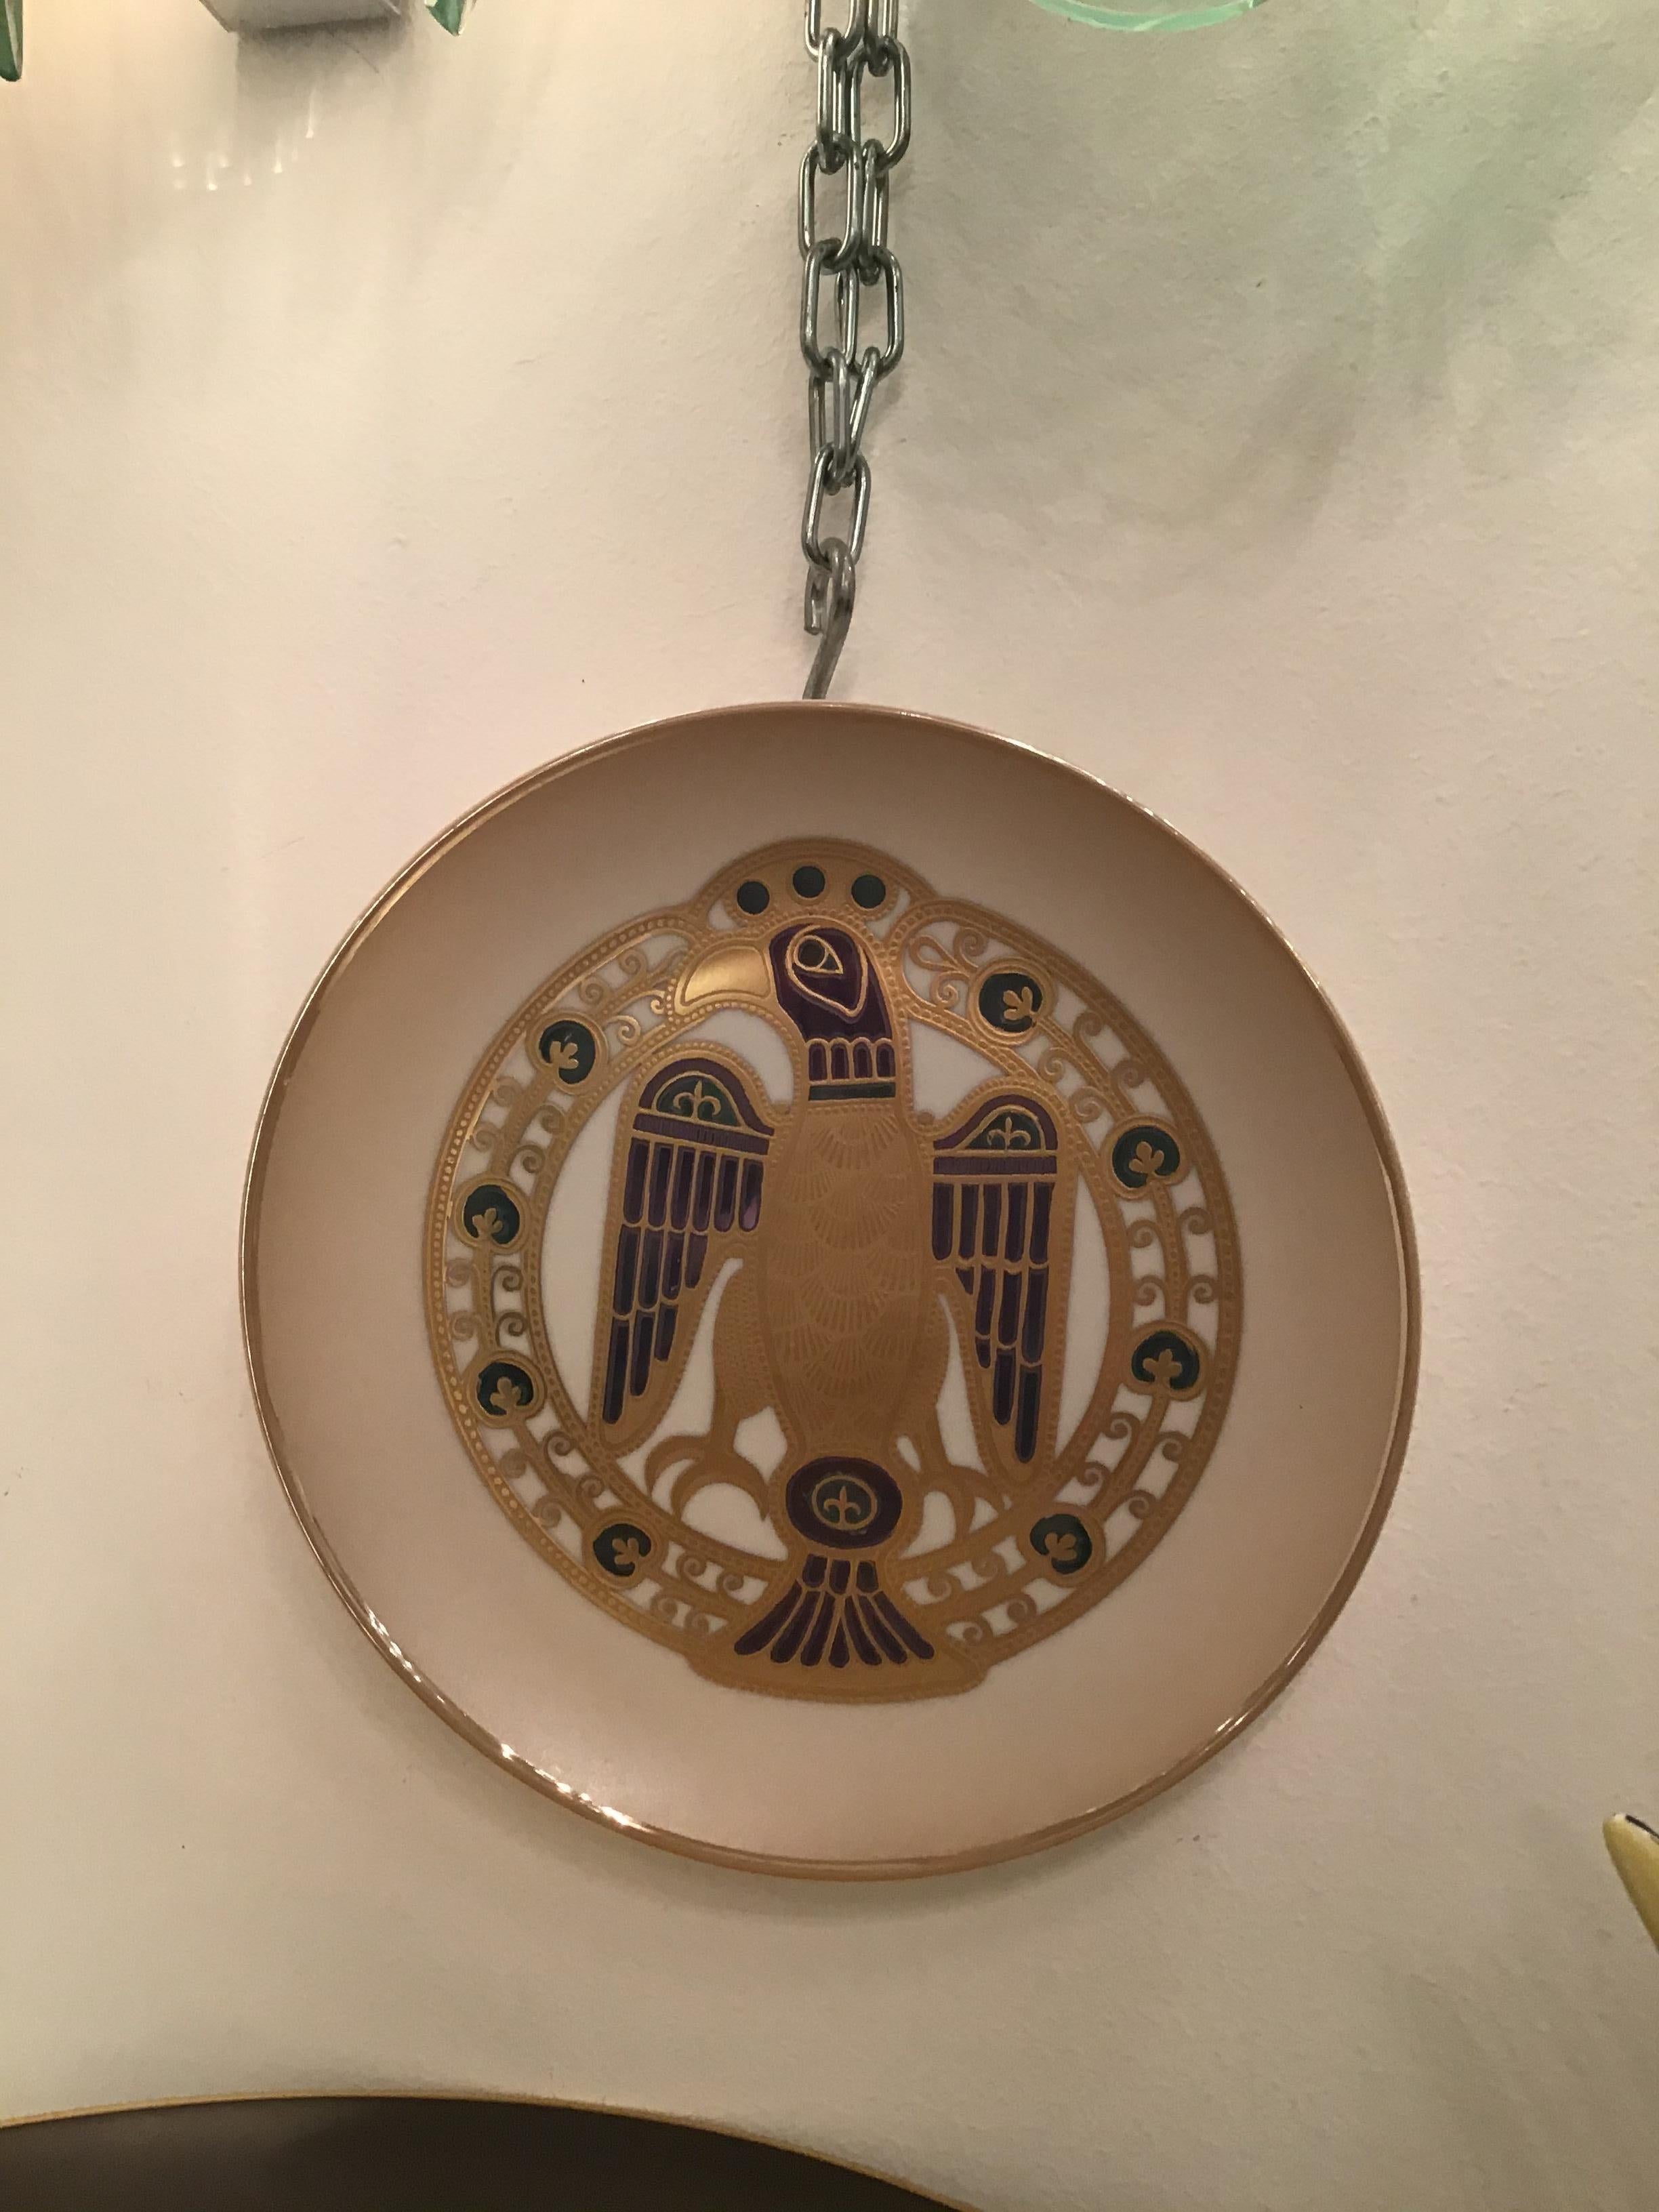 Morbelli porcelain “Gioiellò Germanico Periodo Ottaviano” wall plate worked with pure gold 1983, Italy.